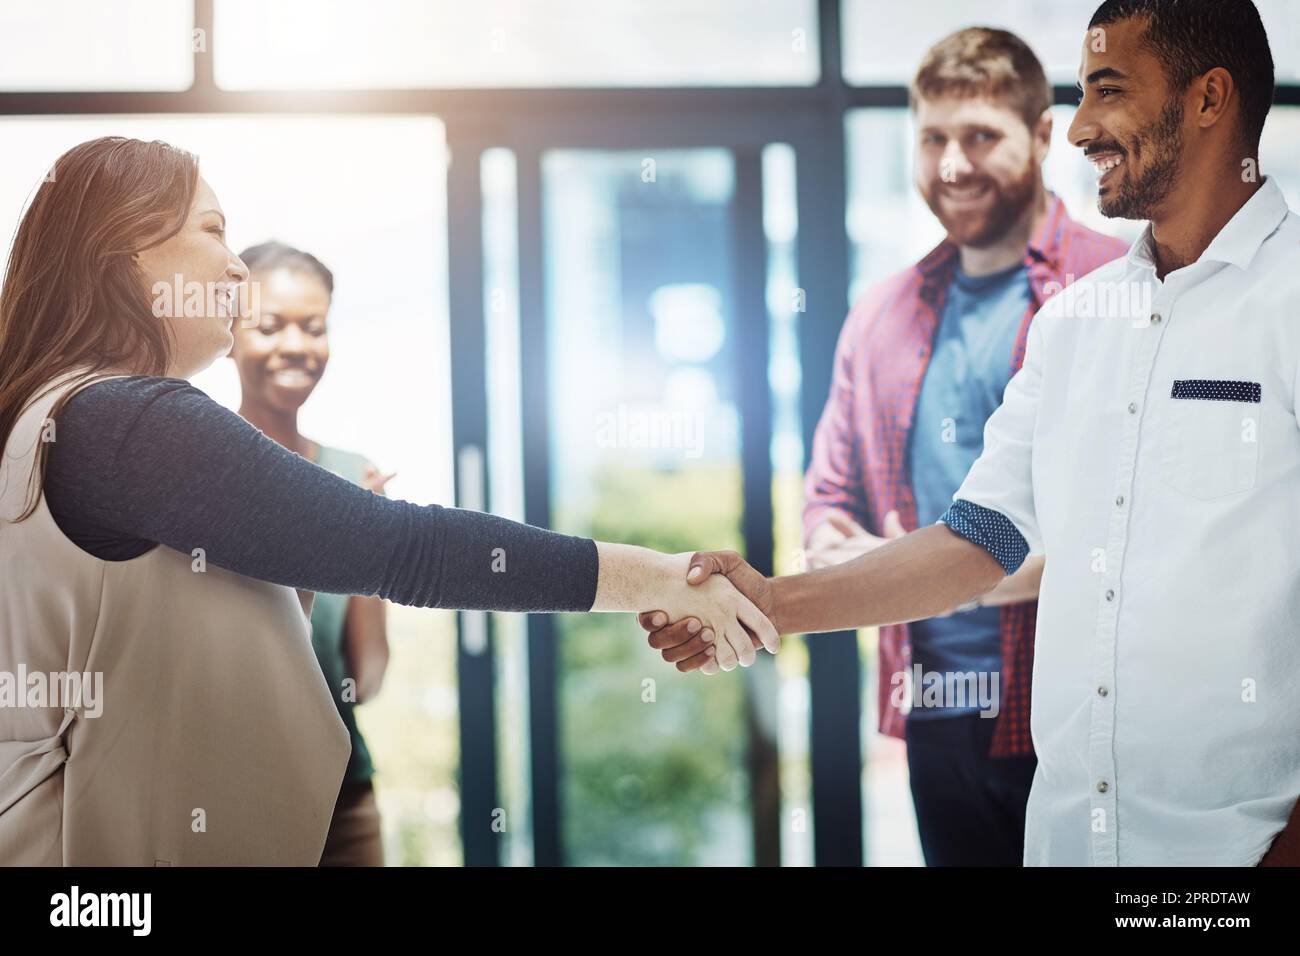 Business people giving handshake, welcoming new employee and standing united while colleagues clap in meeting at work. Coworkers shaking hands, celebrating success or congratulating on a promotion Stock Photo